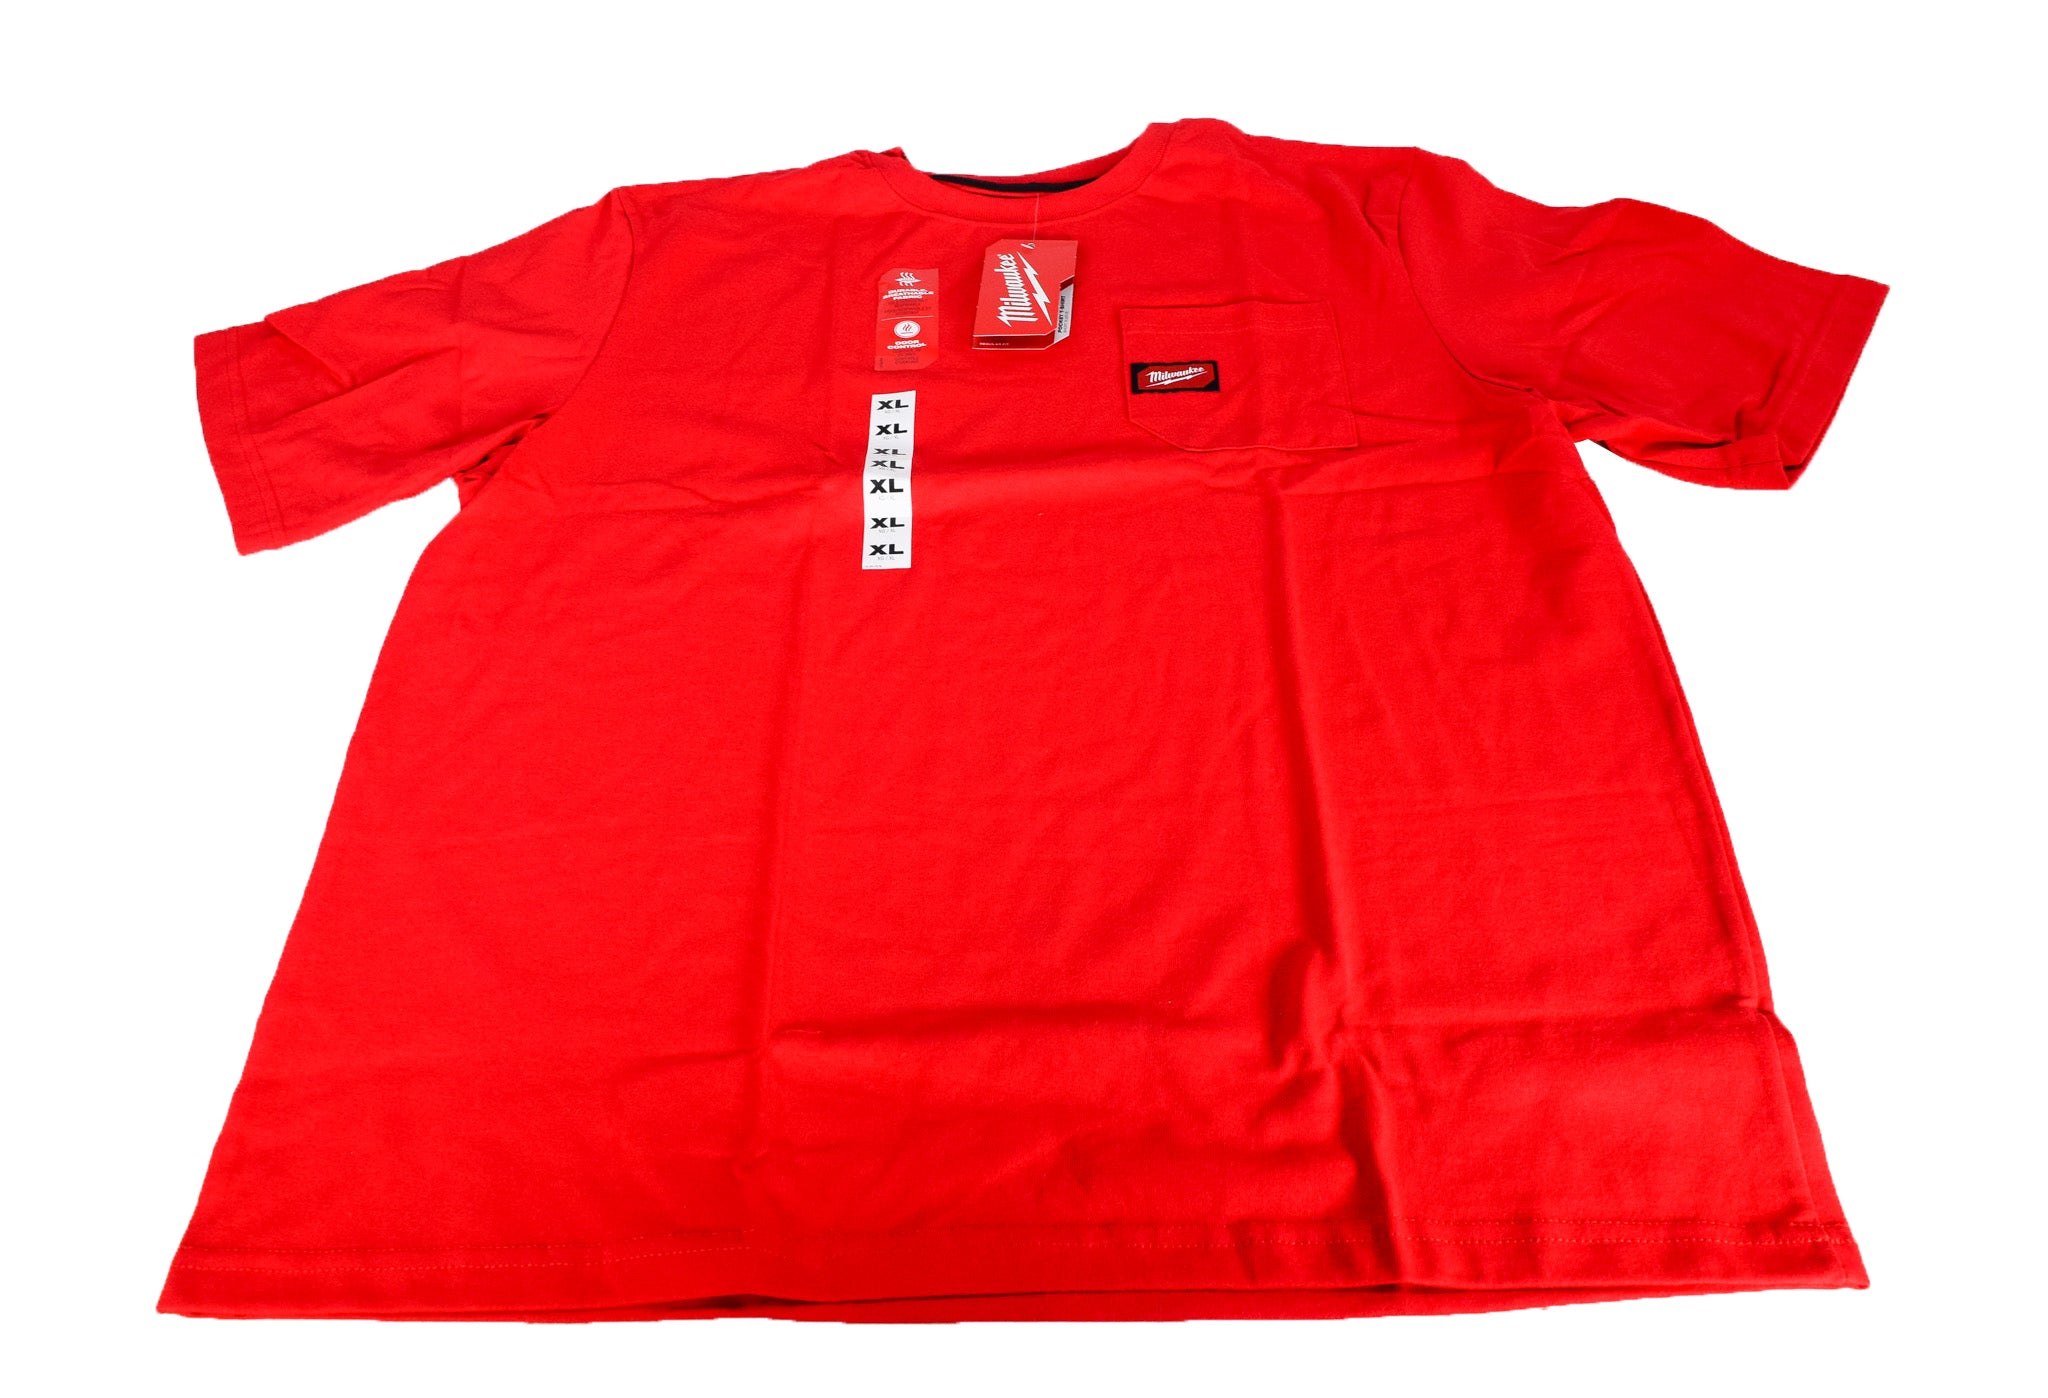 Milwaukee 601R-XL Mens X-Large Red Heavy Duty Cotton/Polyester Short-Sleeve Pocket T-Shirt